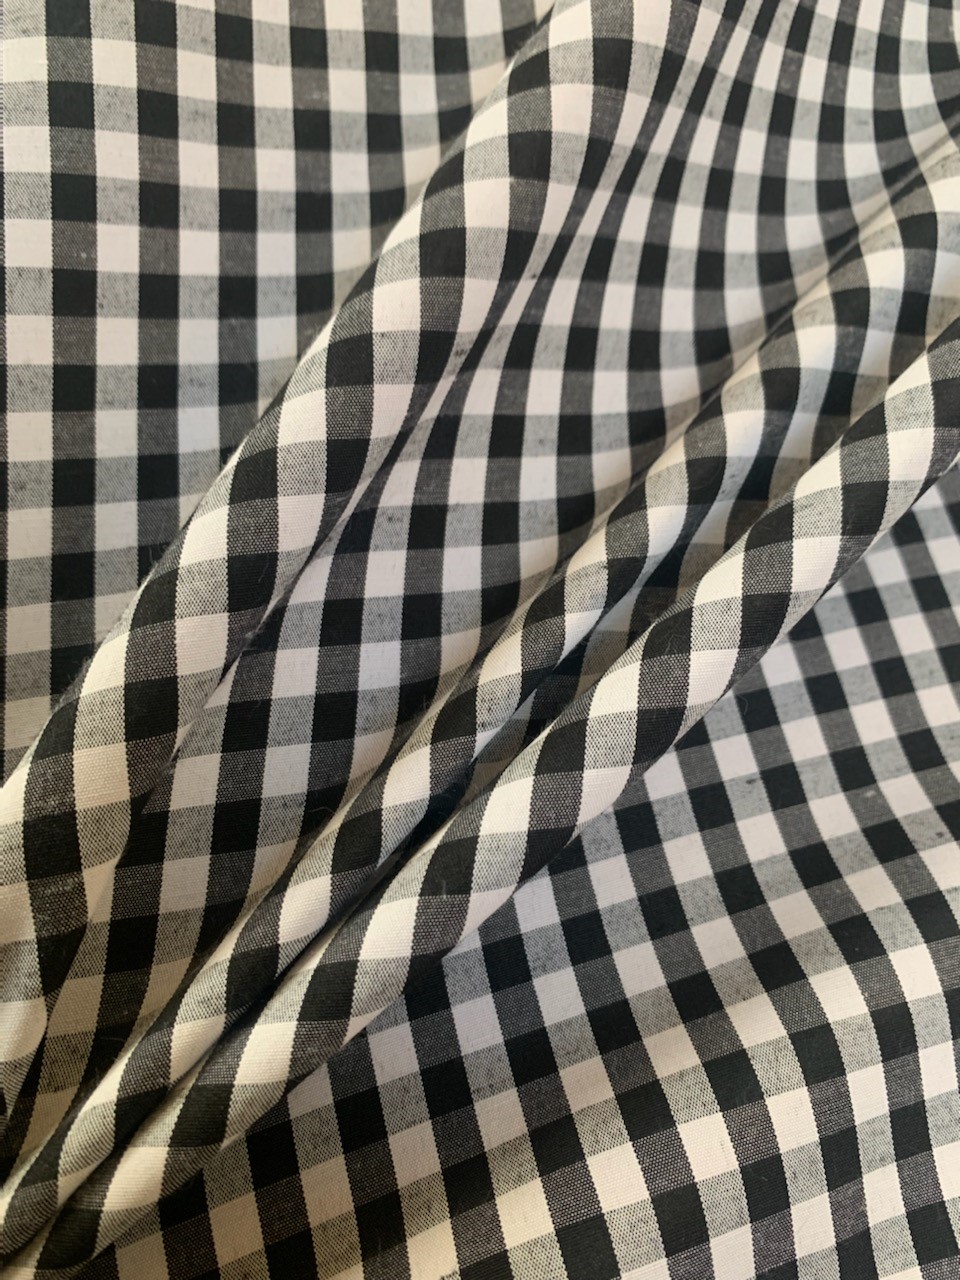 1/4" Black Gingham Fabric 60" Wide By The Yard Poly Cotton Blend